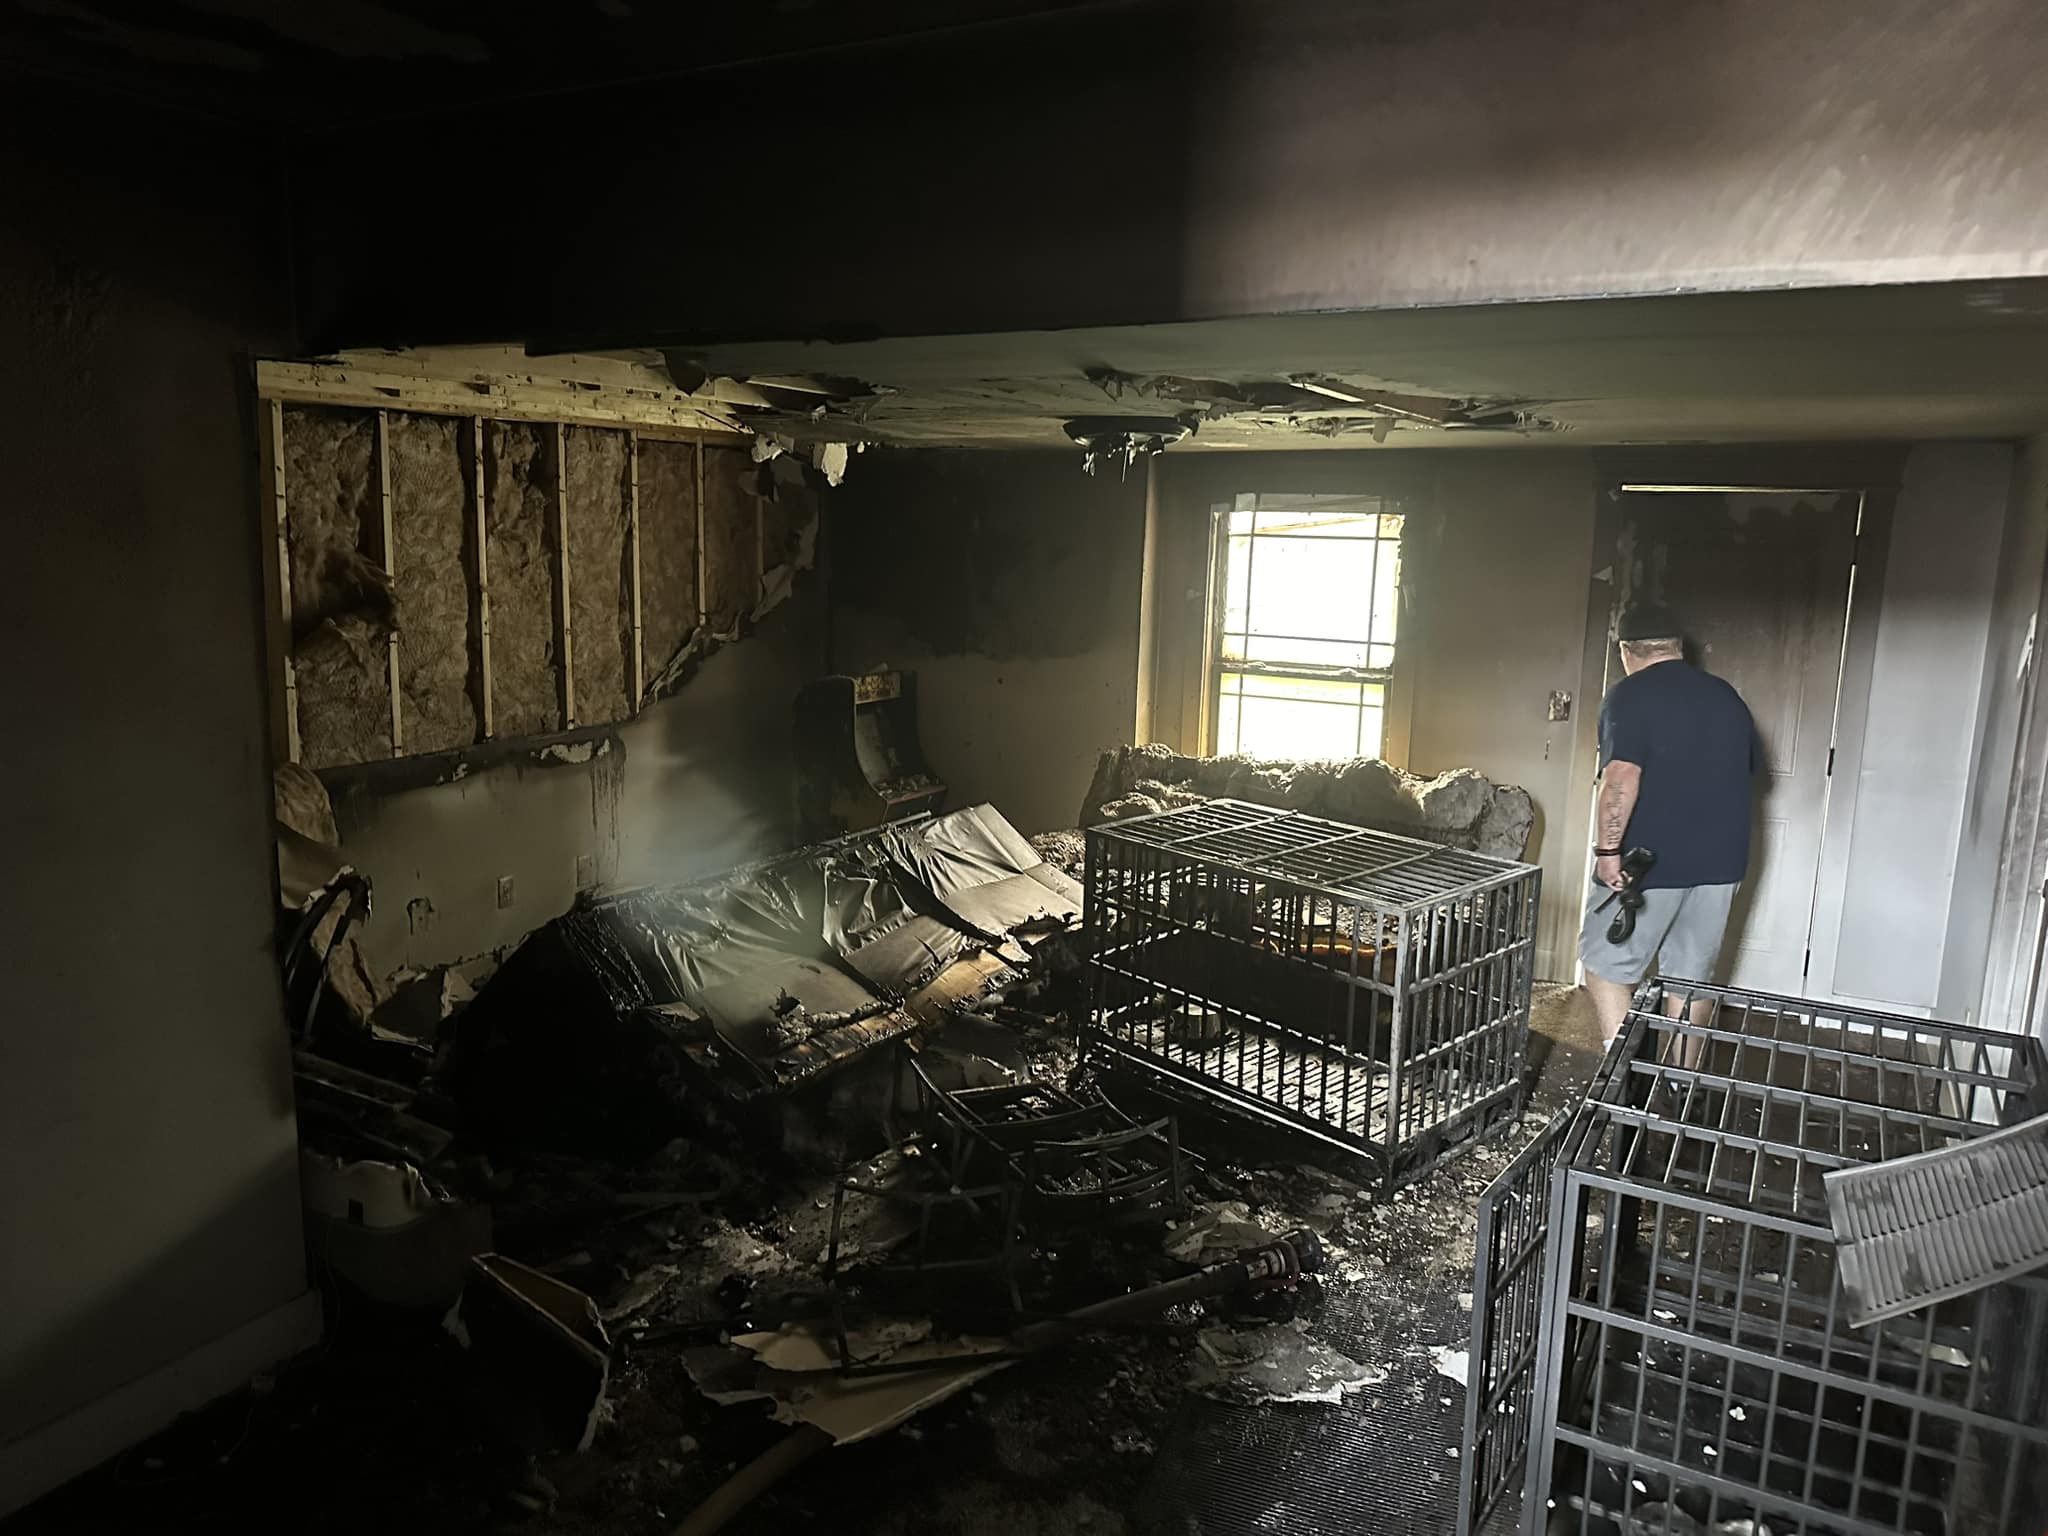 Hixson house fire results in death of 4 dogs - WDEF